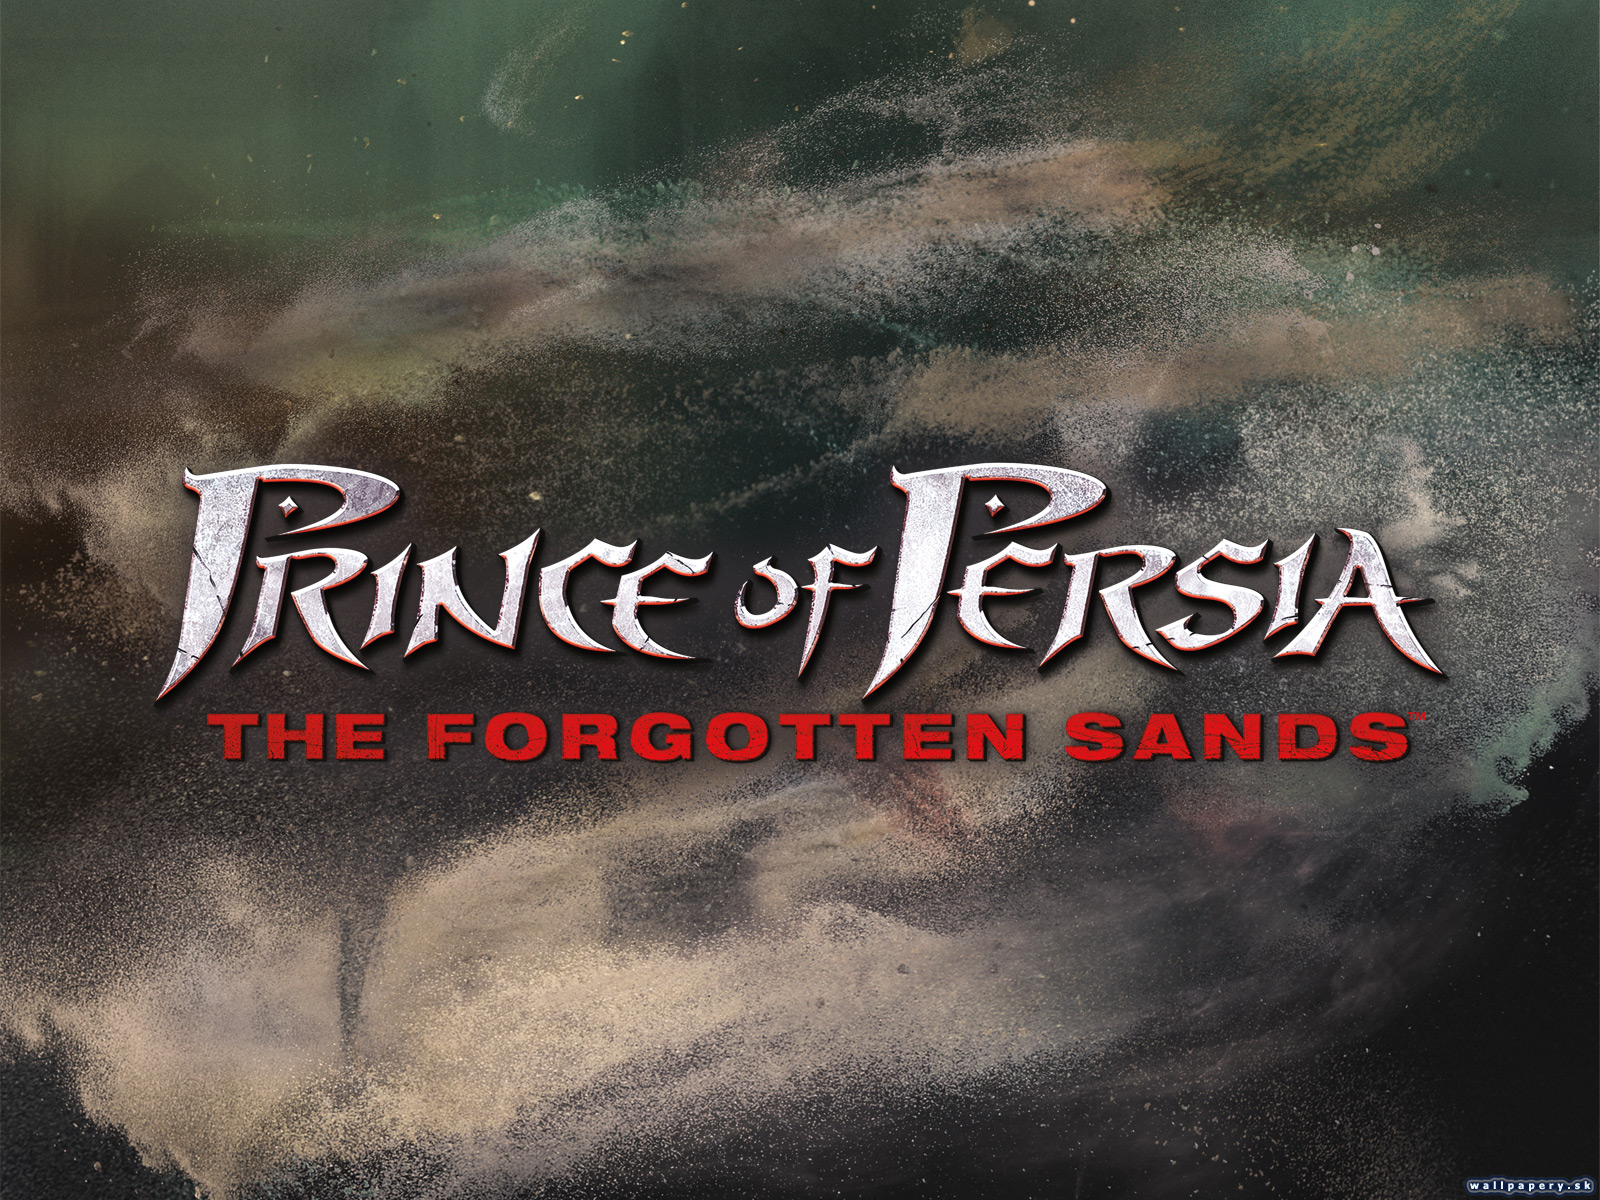 Prince of Persia: The Forgotten Sands - wallpaper 9